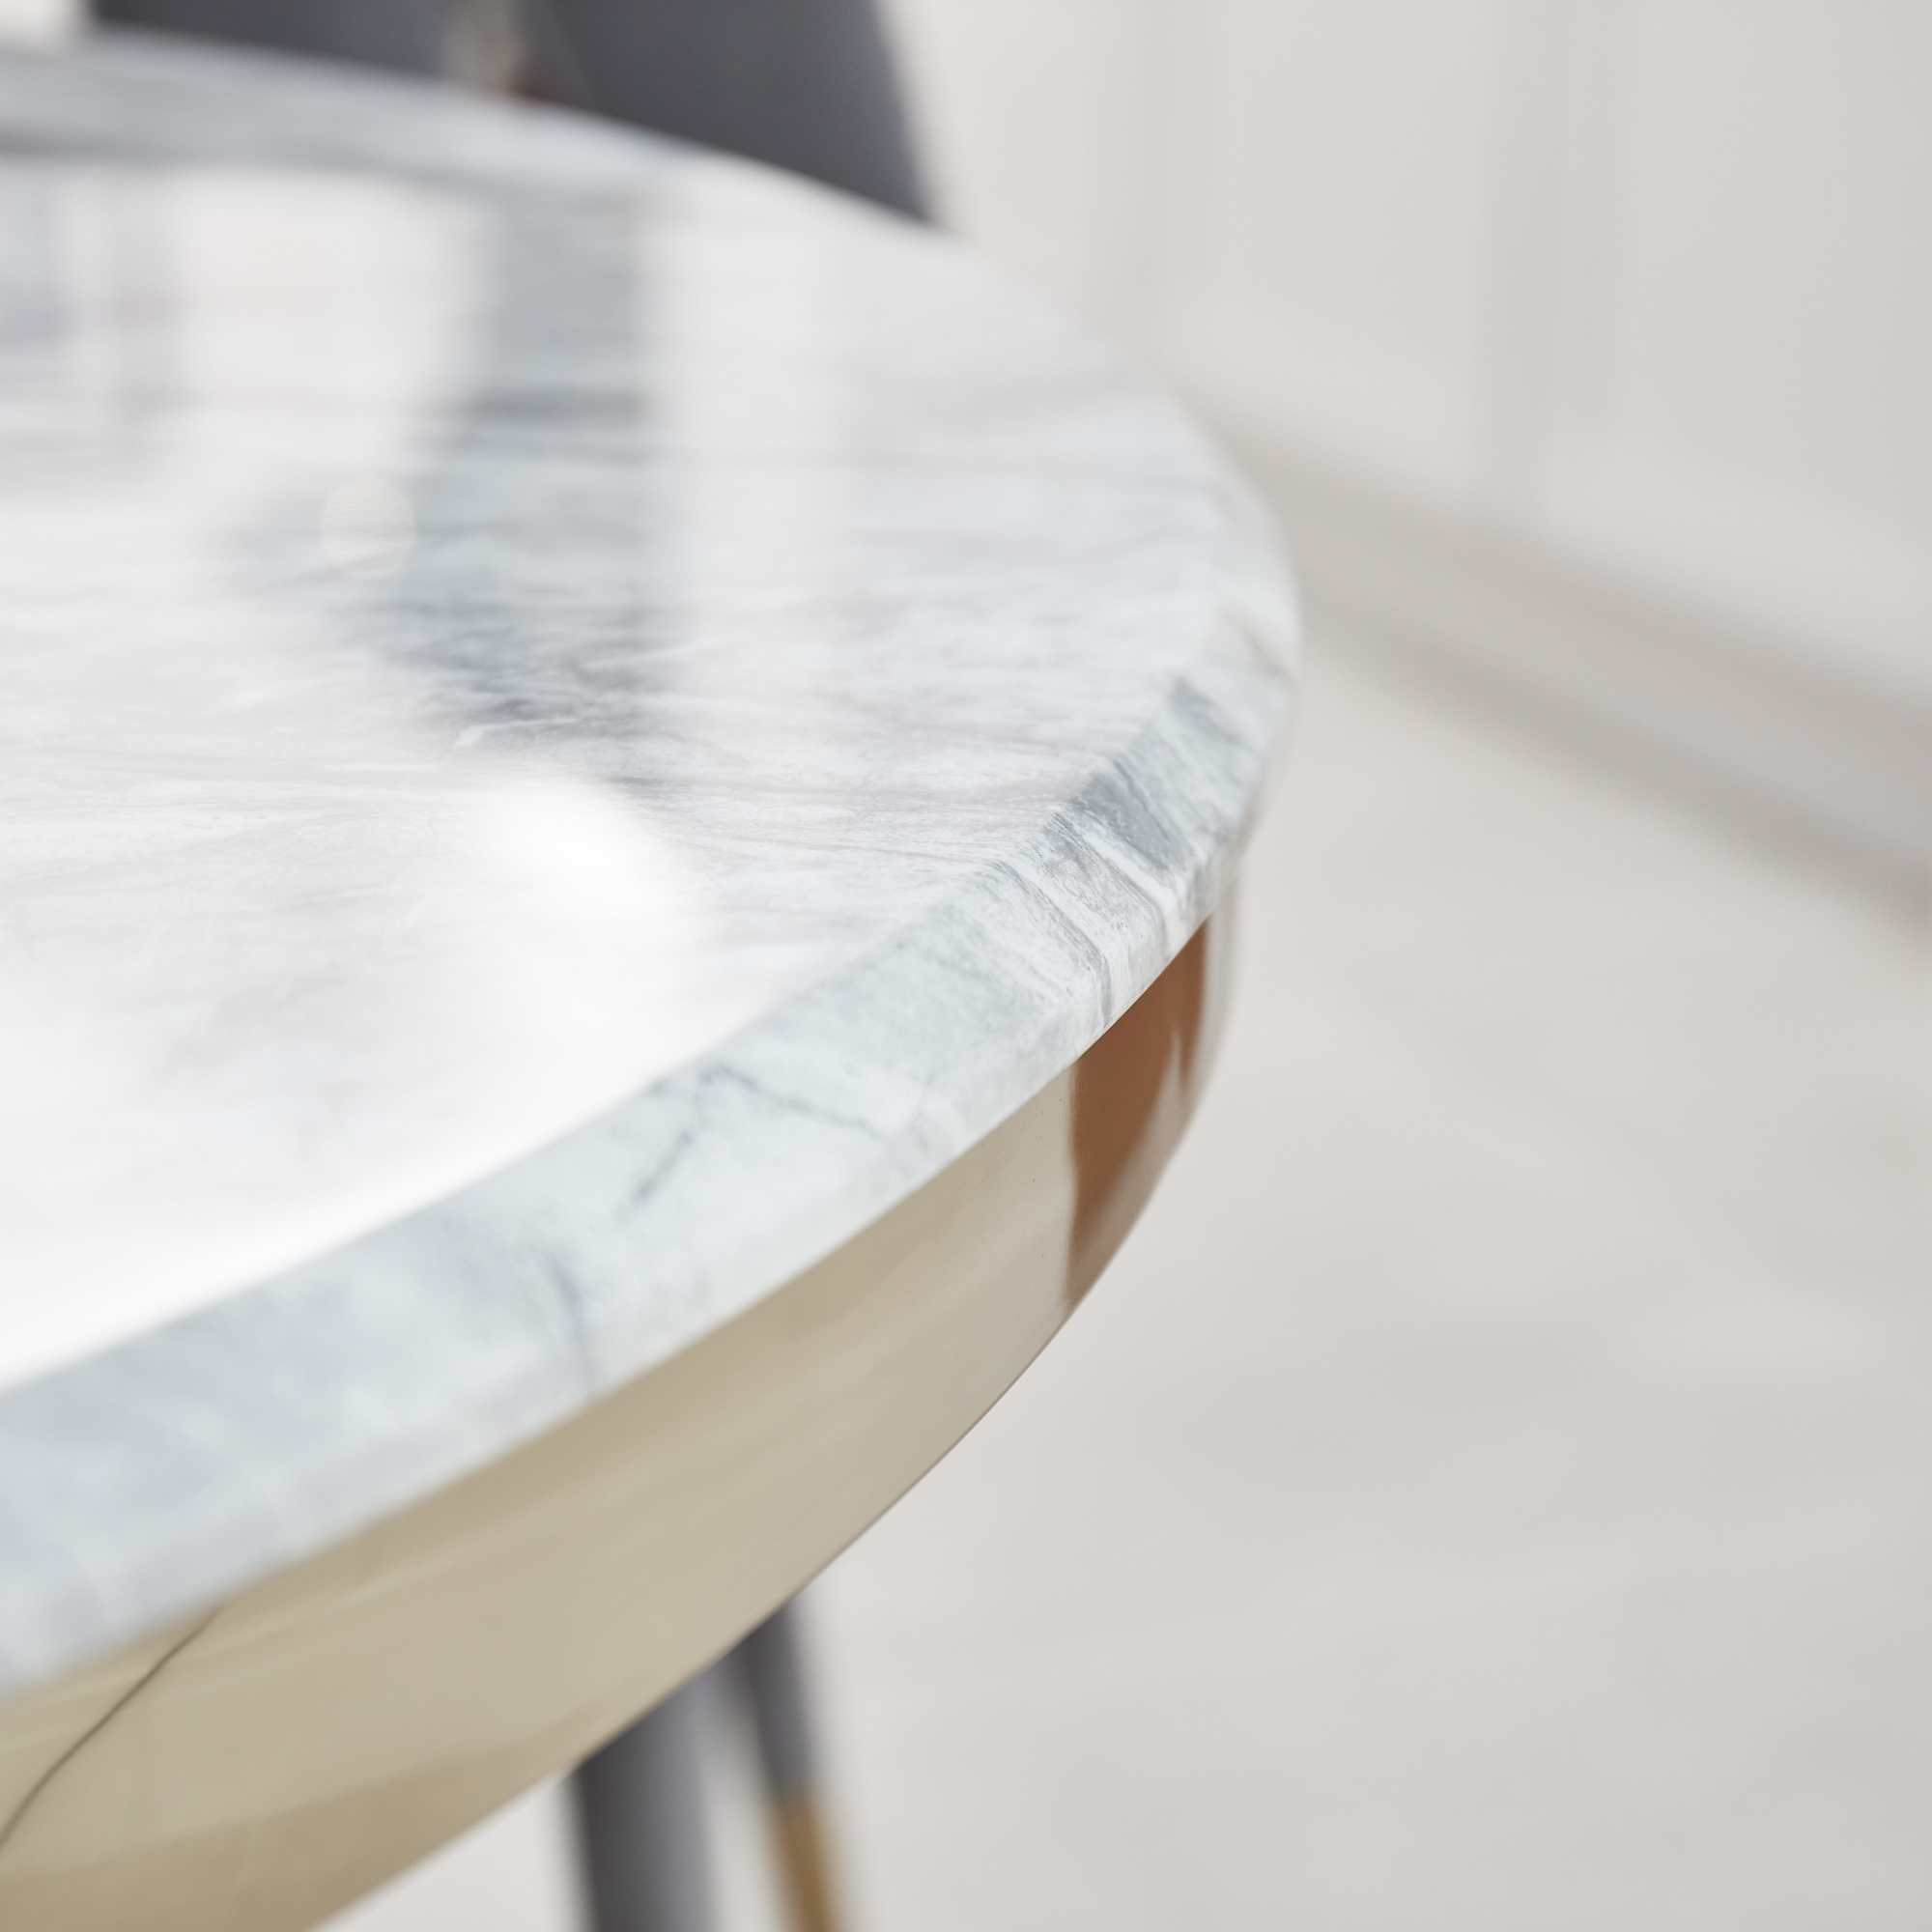 1.3M Circular Pedestal Gold Stainless Steel Dining Table with a Grey Marble Effect